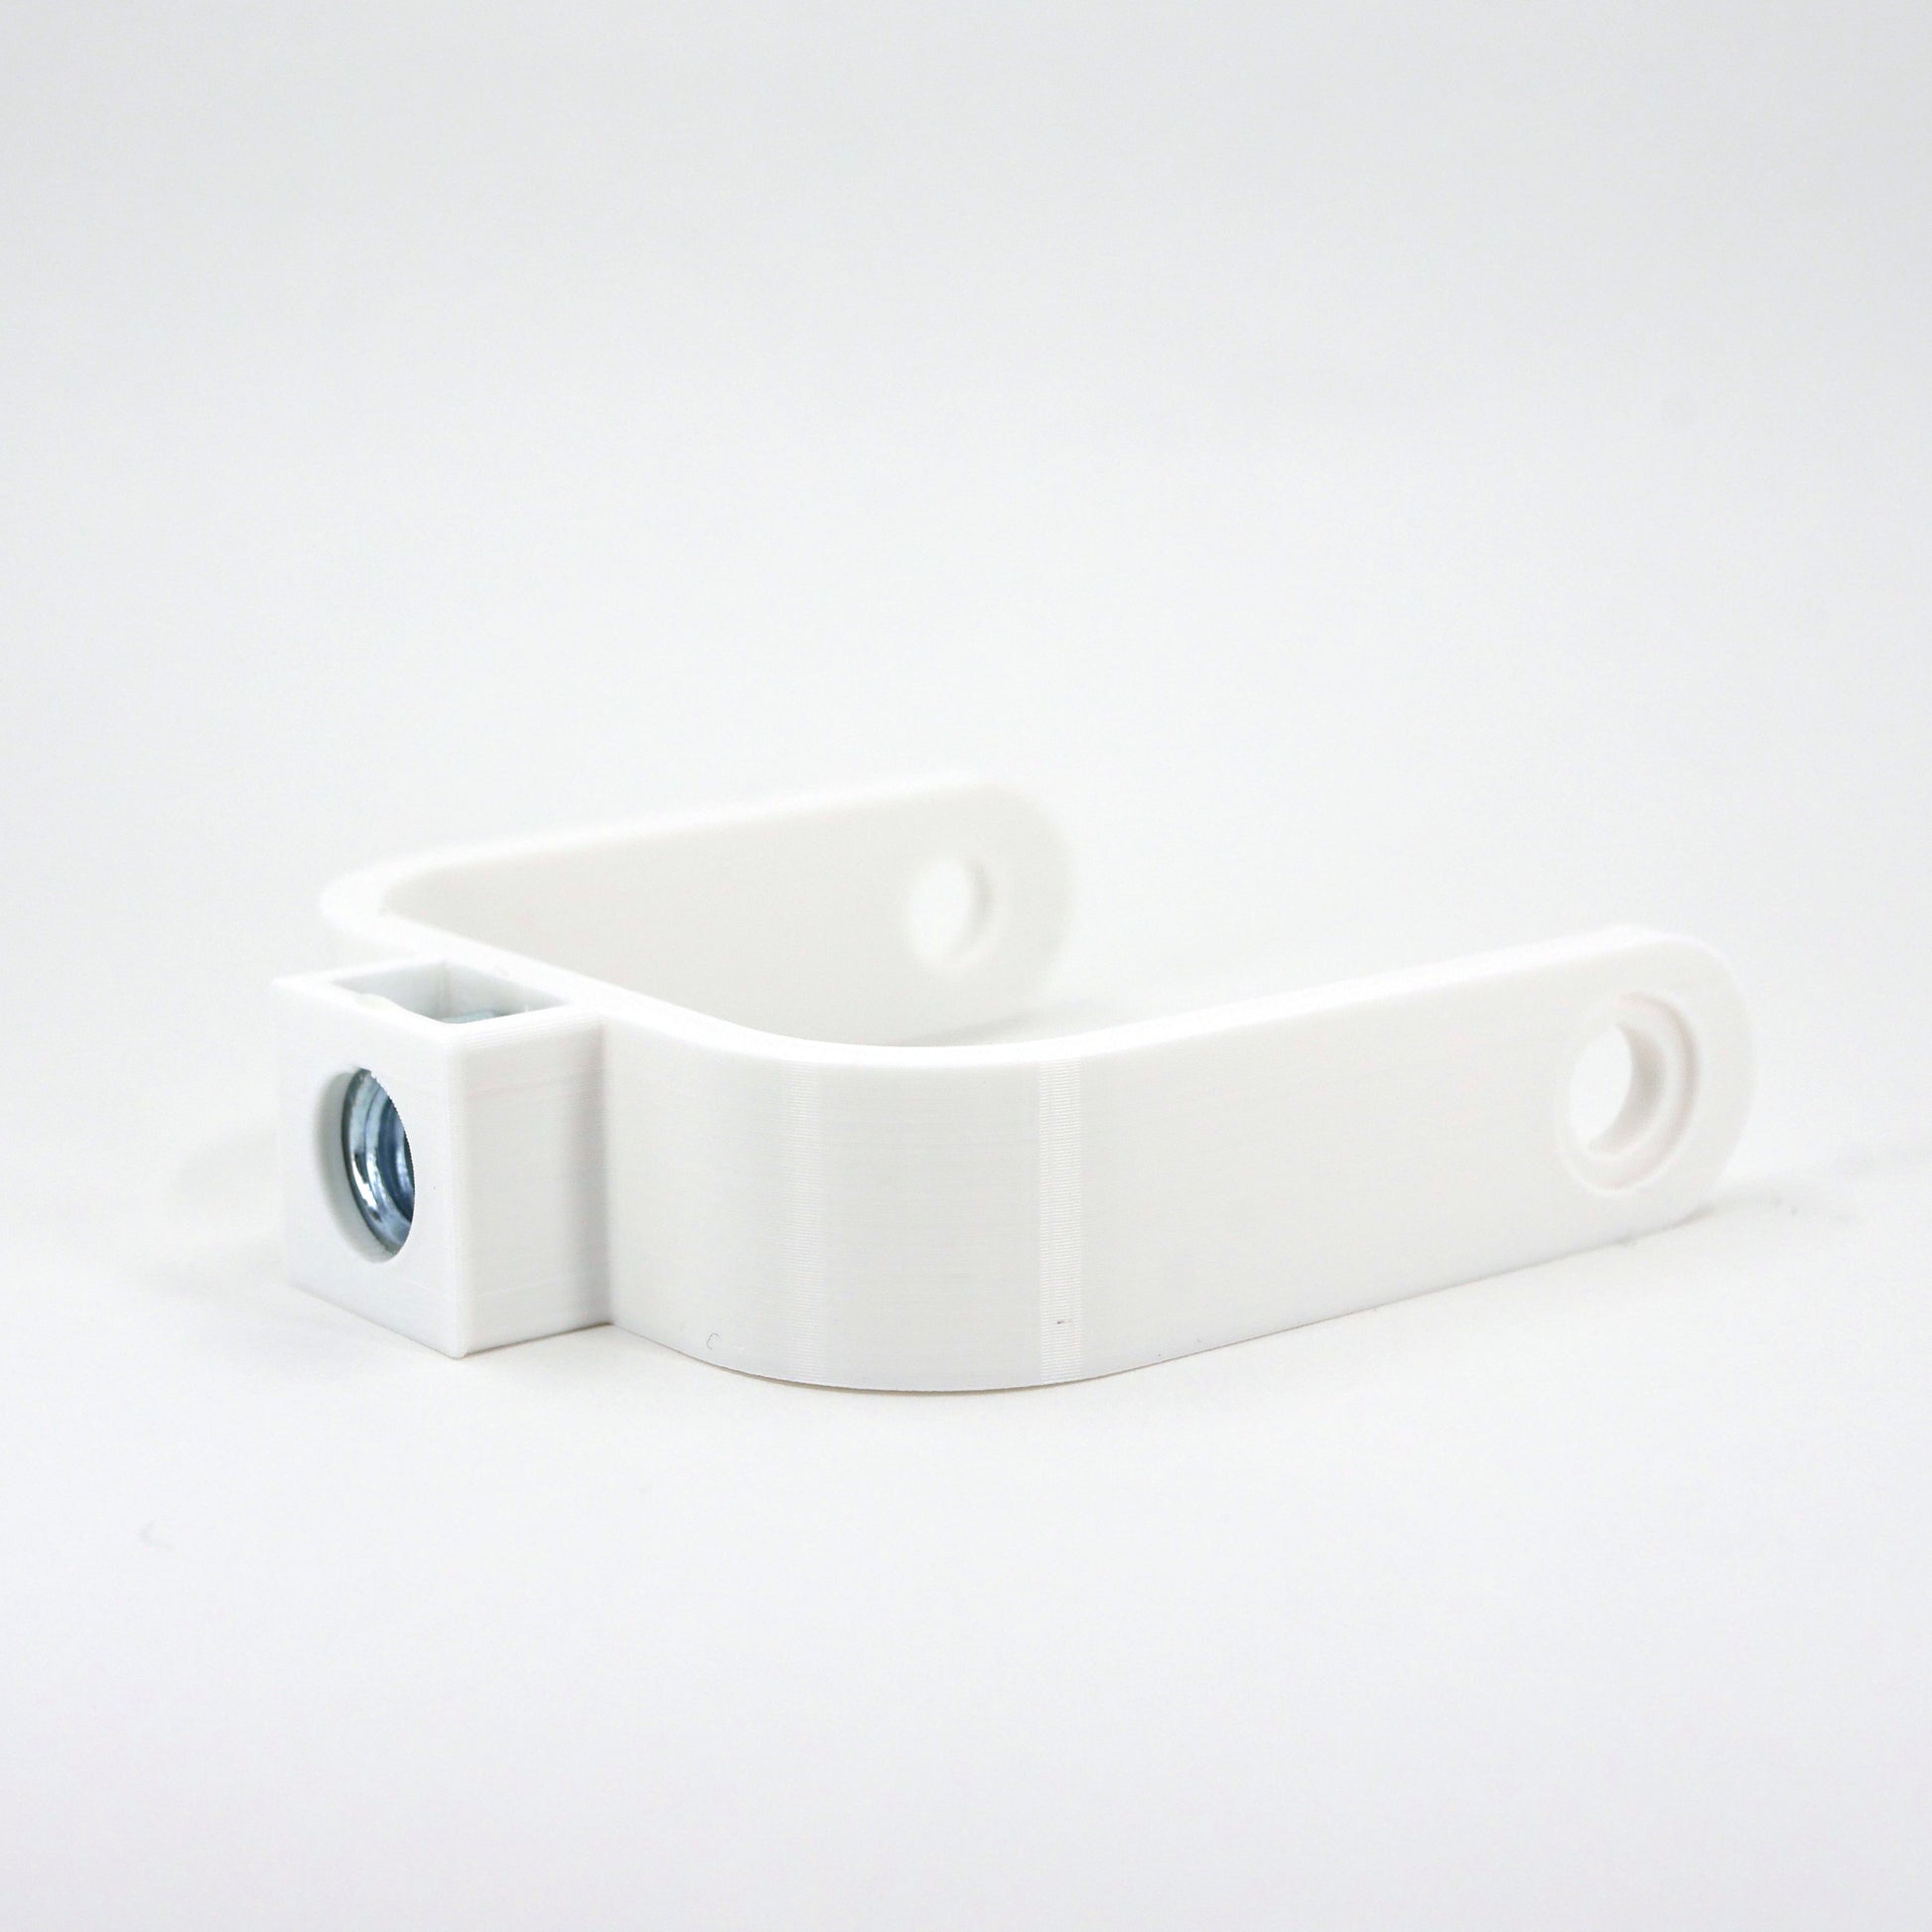 The right side of a white microphone mount for the Blue Yeti Nano microphone.